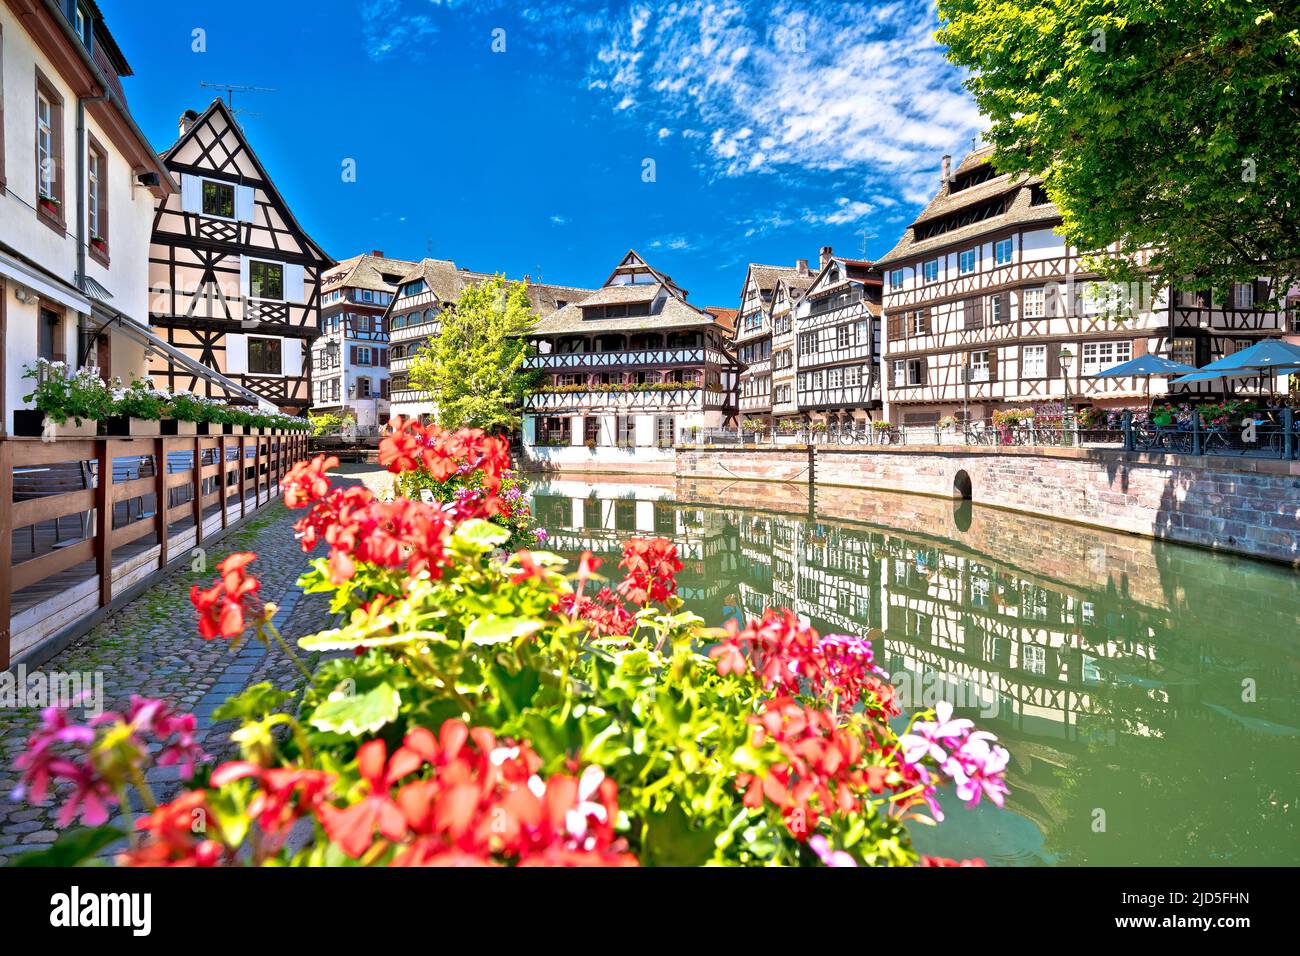 Town of Strasbourg canal and historic architecture in historic Little French quarters, Alsace region of France Stock Photo